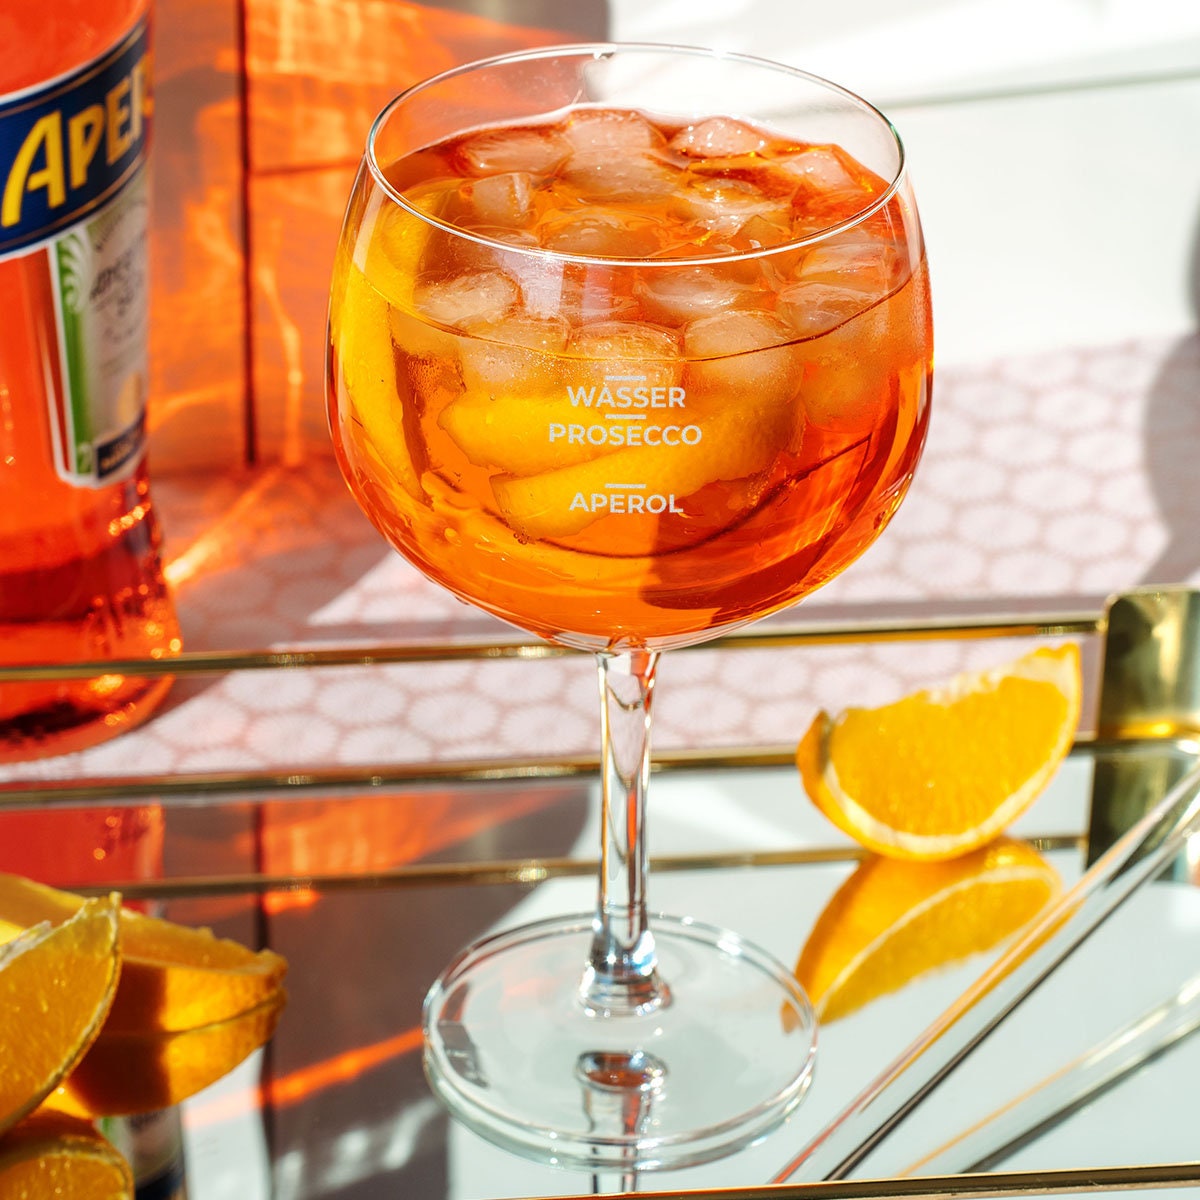 Personalized Aperol Spritz Glass - Engraved with Your Name and/or Text - Dishwasher-Safe - 530 ml - High-Quality Laser Engraving